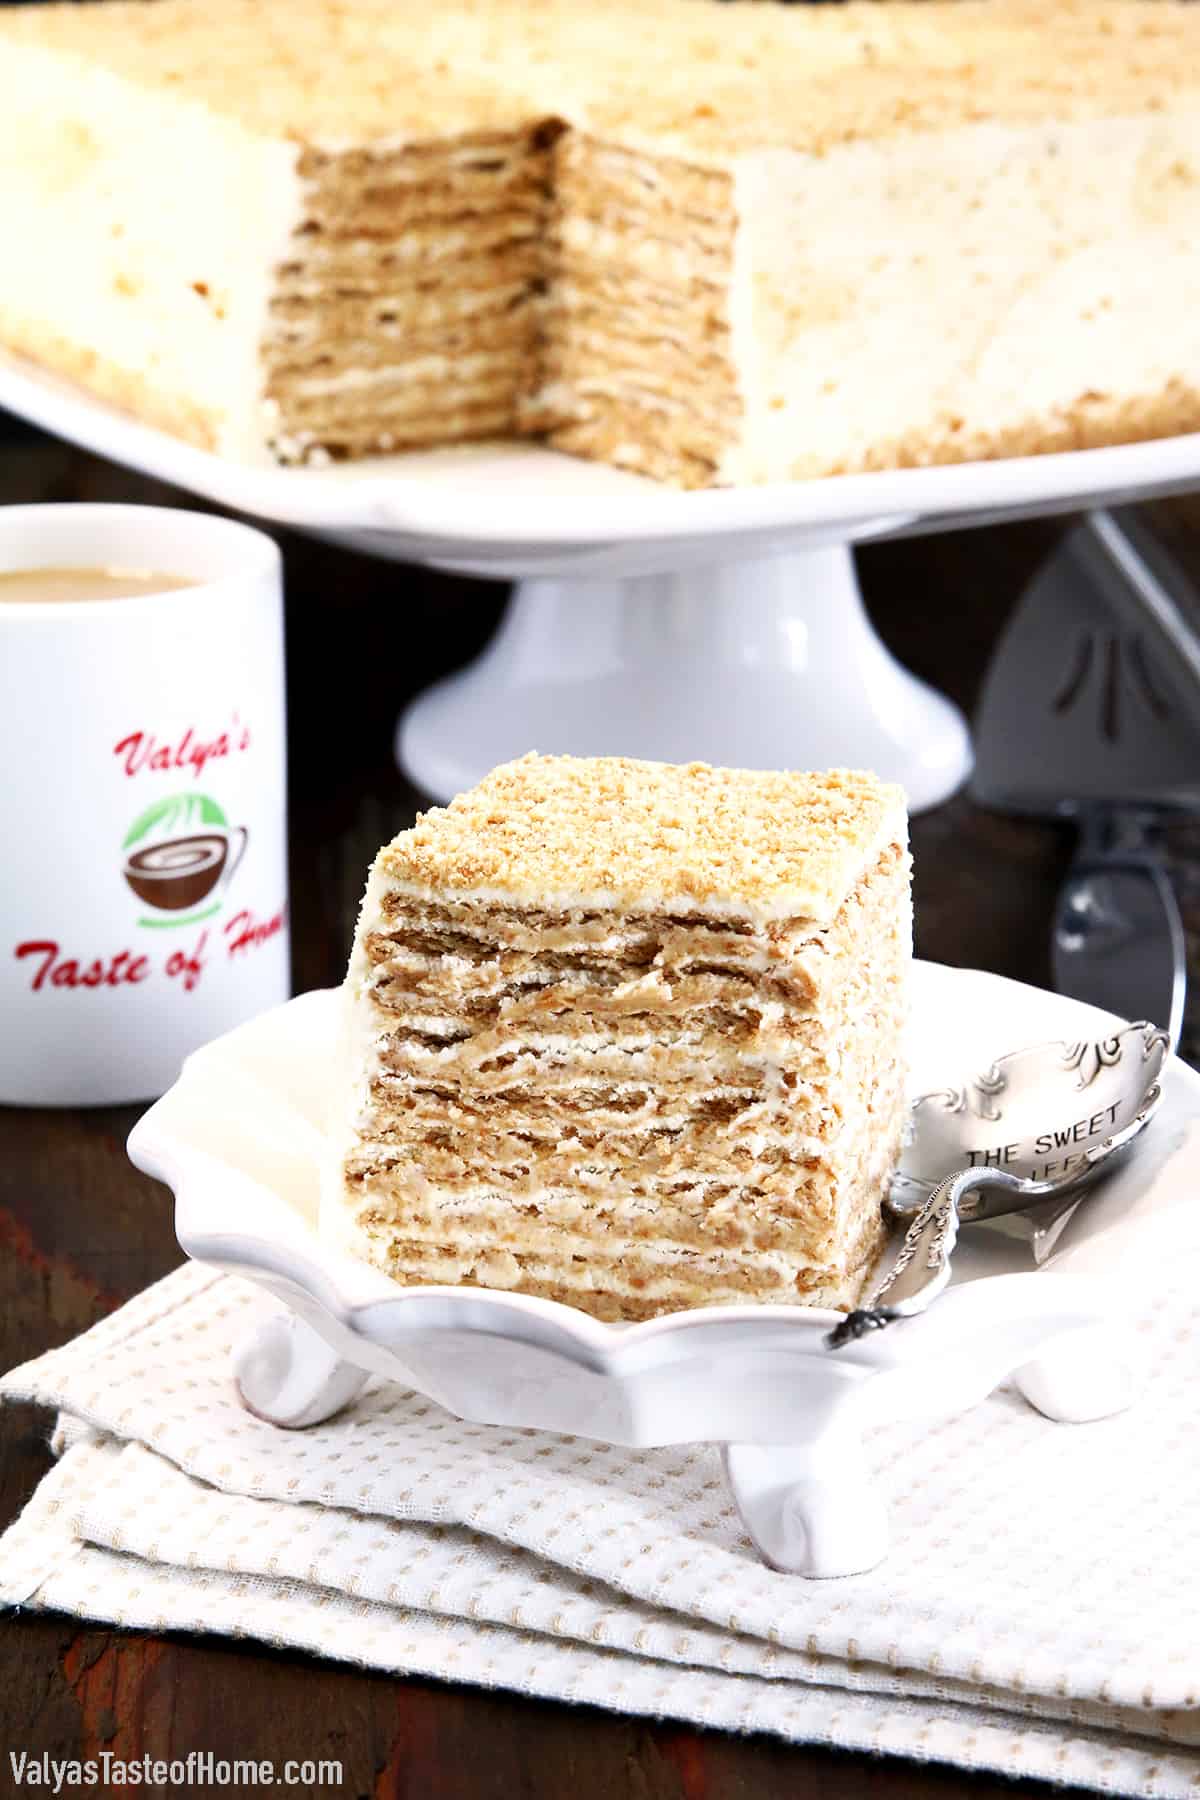 Sometimes we all need a bit of a break from the hot oven, right? Or maybe you're in a time crunch but need to produce a delicious dessert. Well, this No Bake Honey Graham Cracker Cake will come to your rescue! You ONLY need 3 ingredients! No baking required.